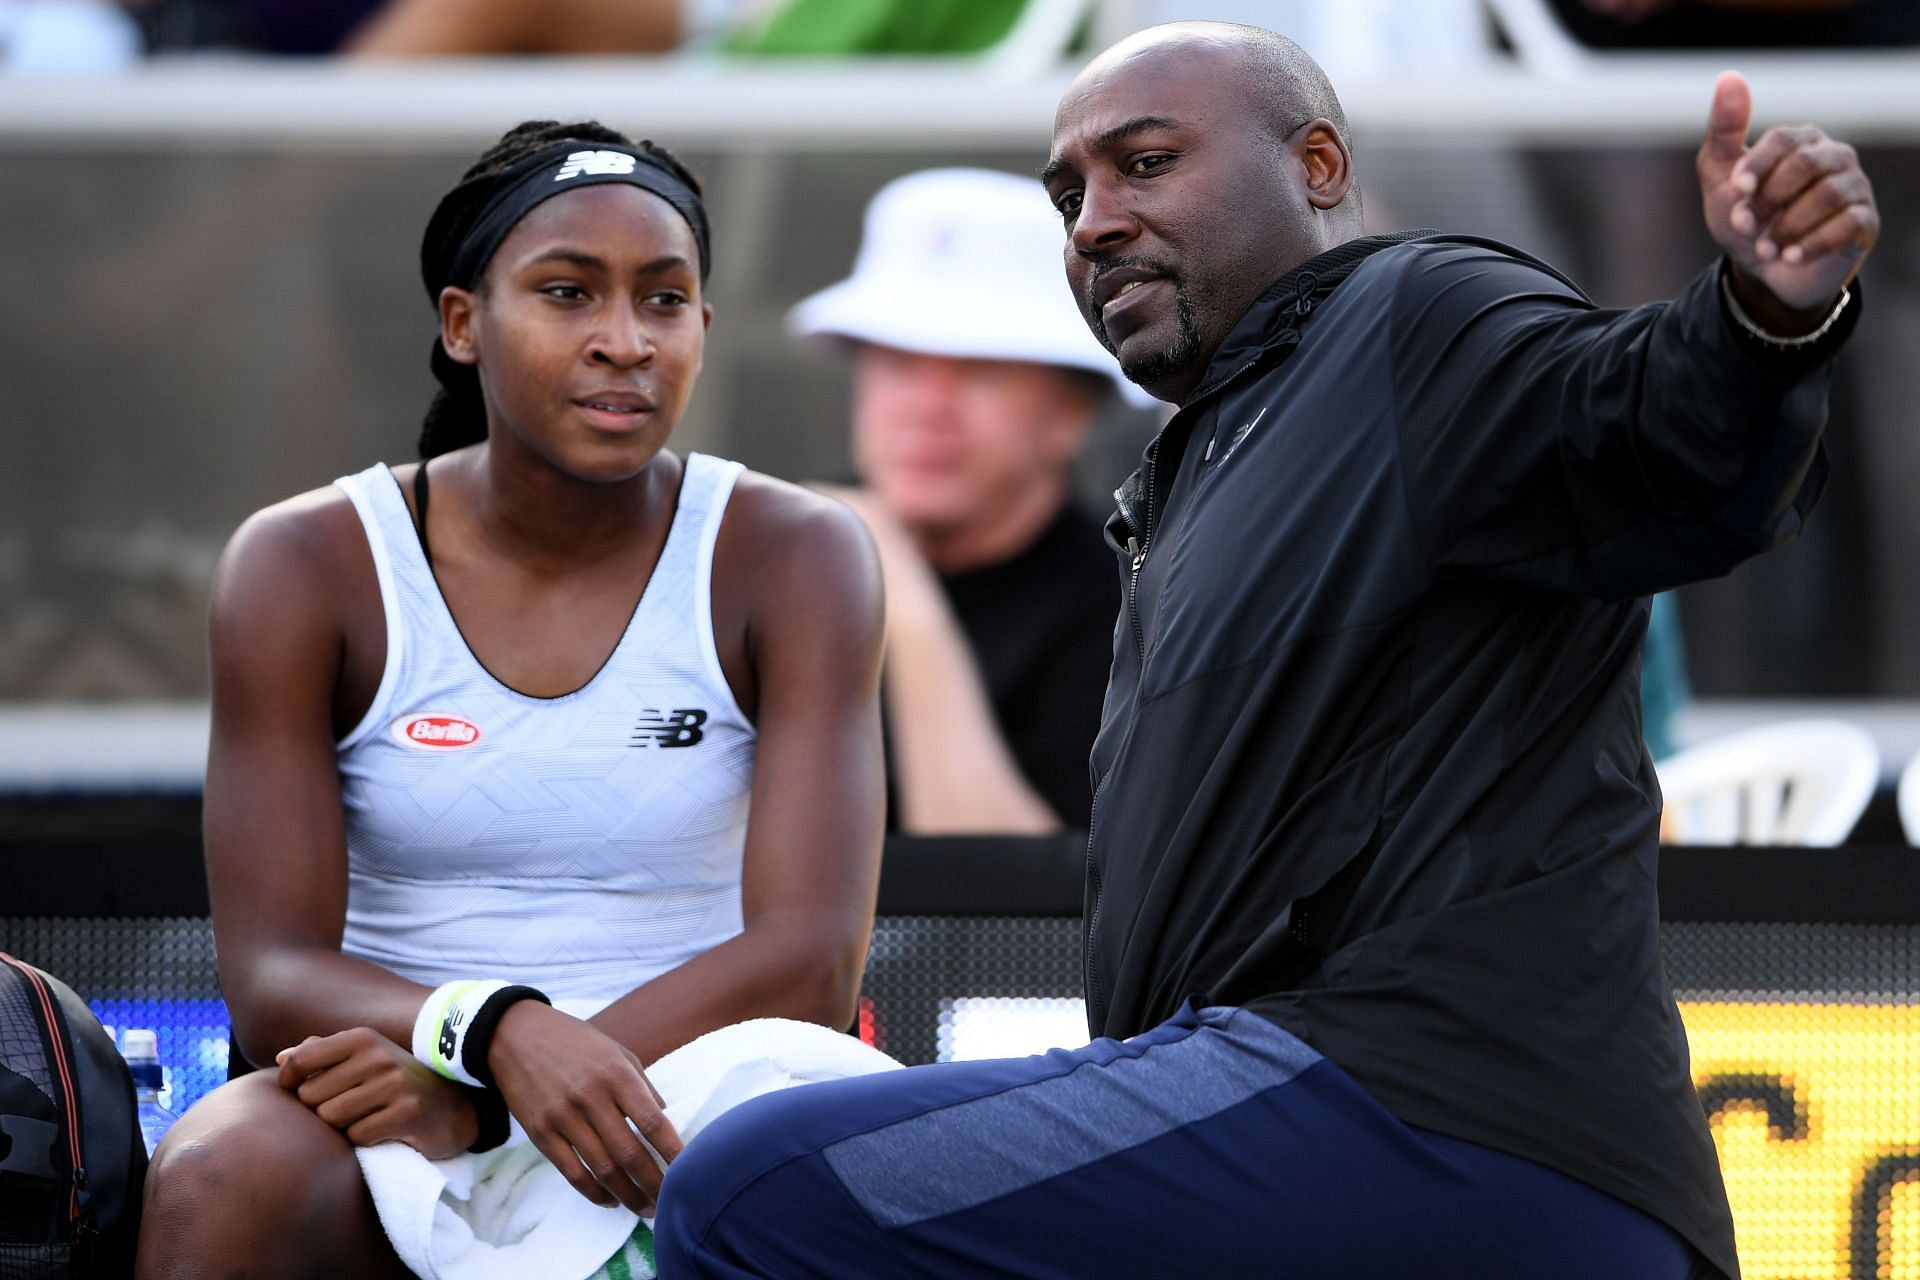 Coco Gauff chatting with her Dad at the French Open